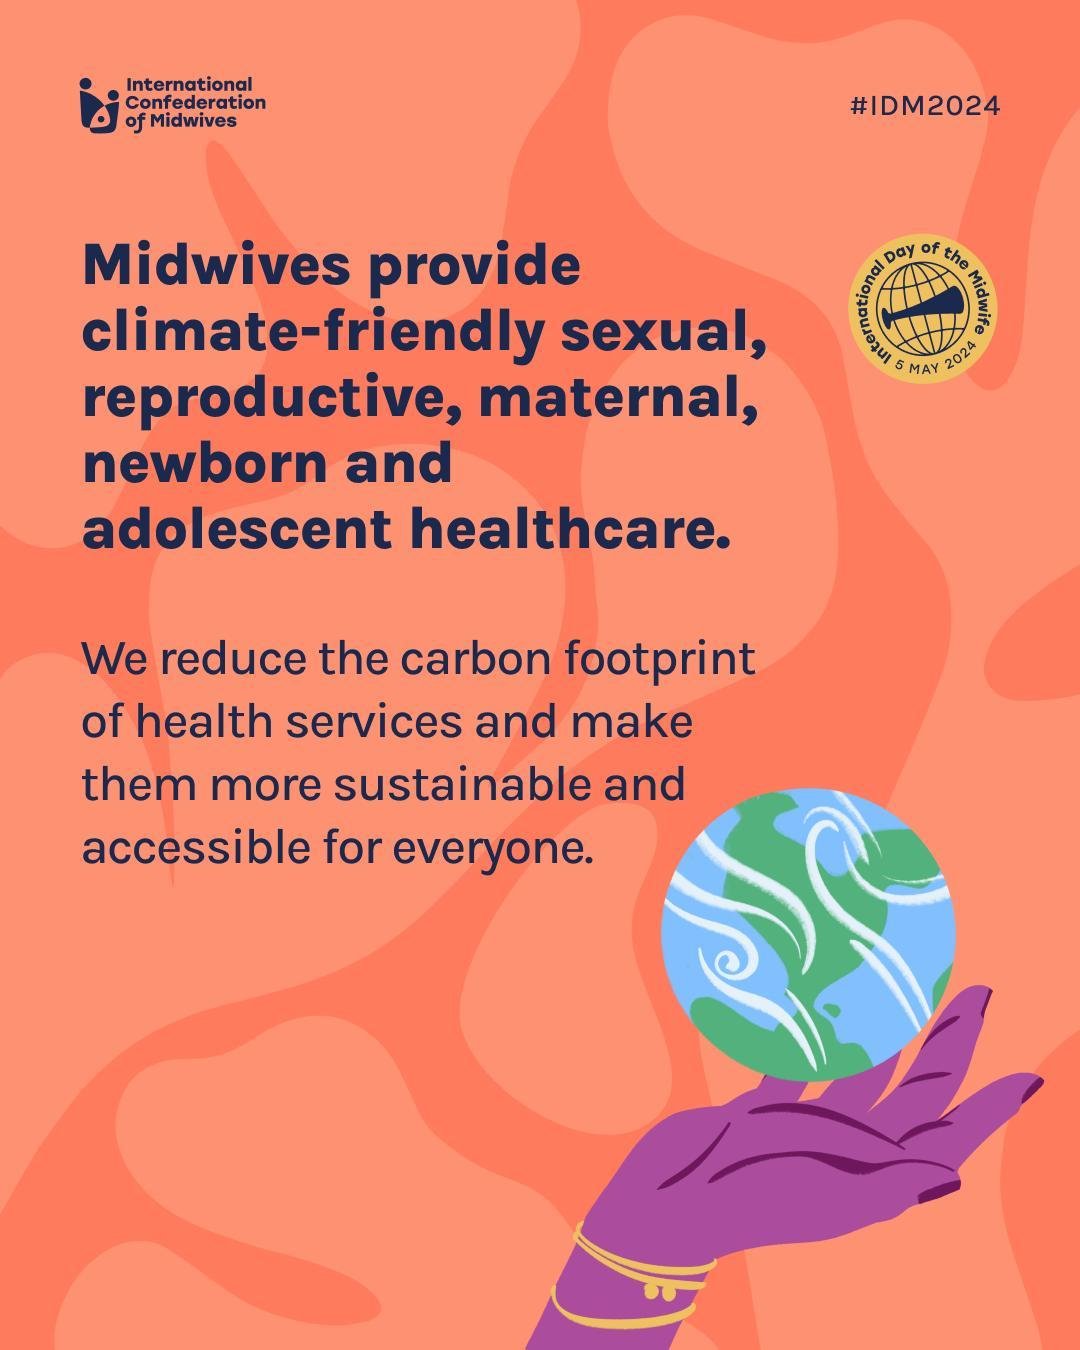 Midwives provide climate-friendly #SRMNAH. 🌍🌱

By providing services in communities where people live, we reduce the need for travel to health facilities. Having access to the care of a midwife ensures that the time and expertise of obstetricians i